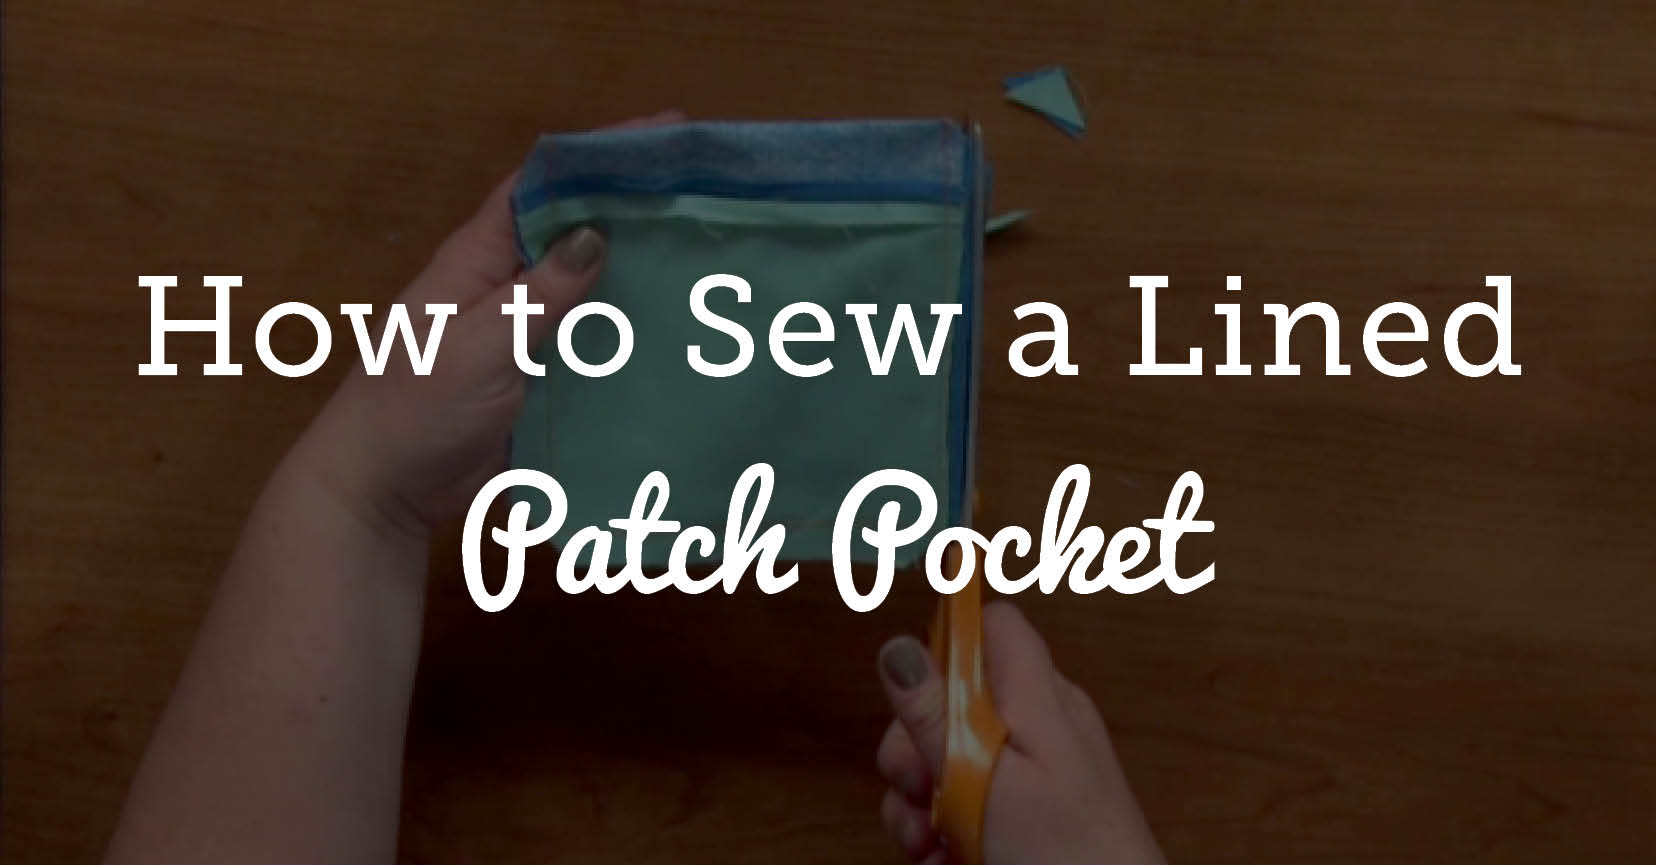 Sew a lined pocket